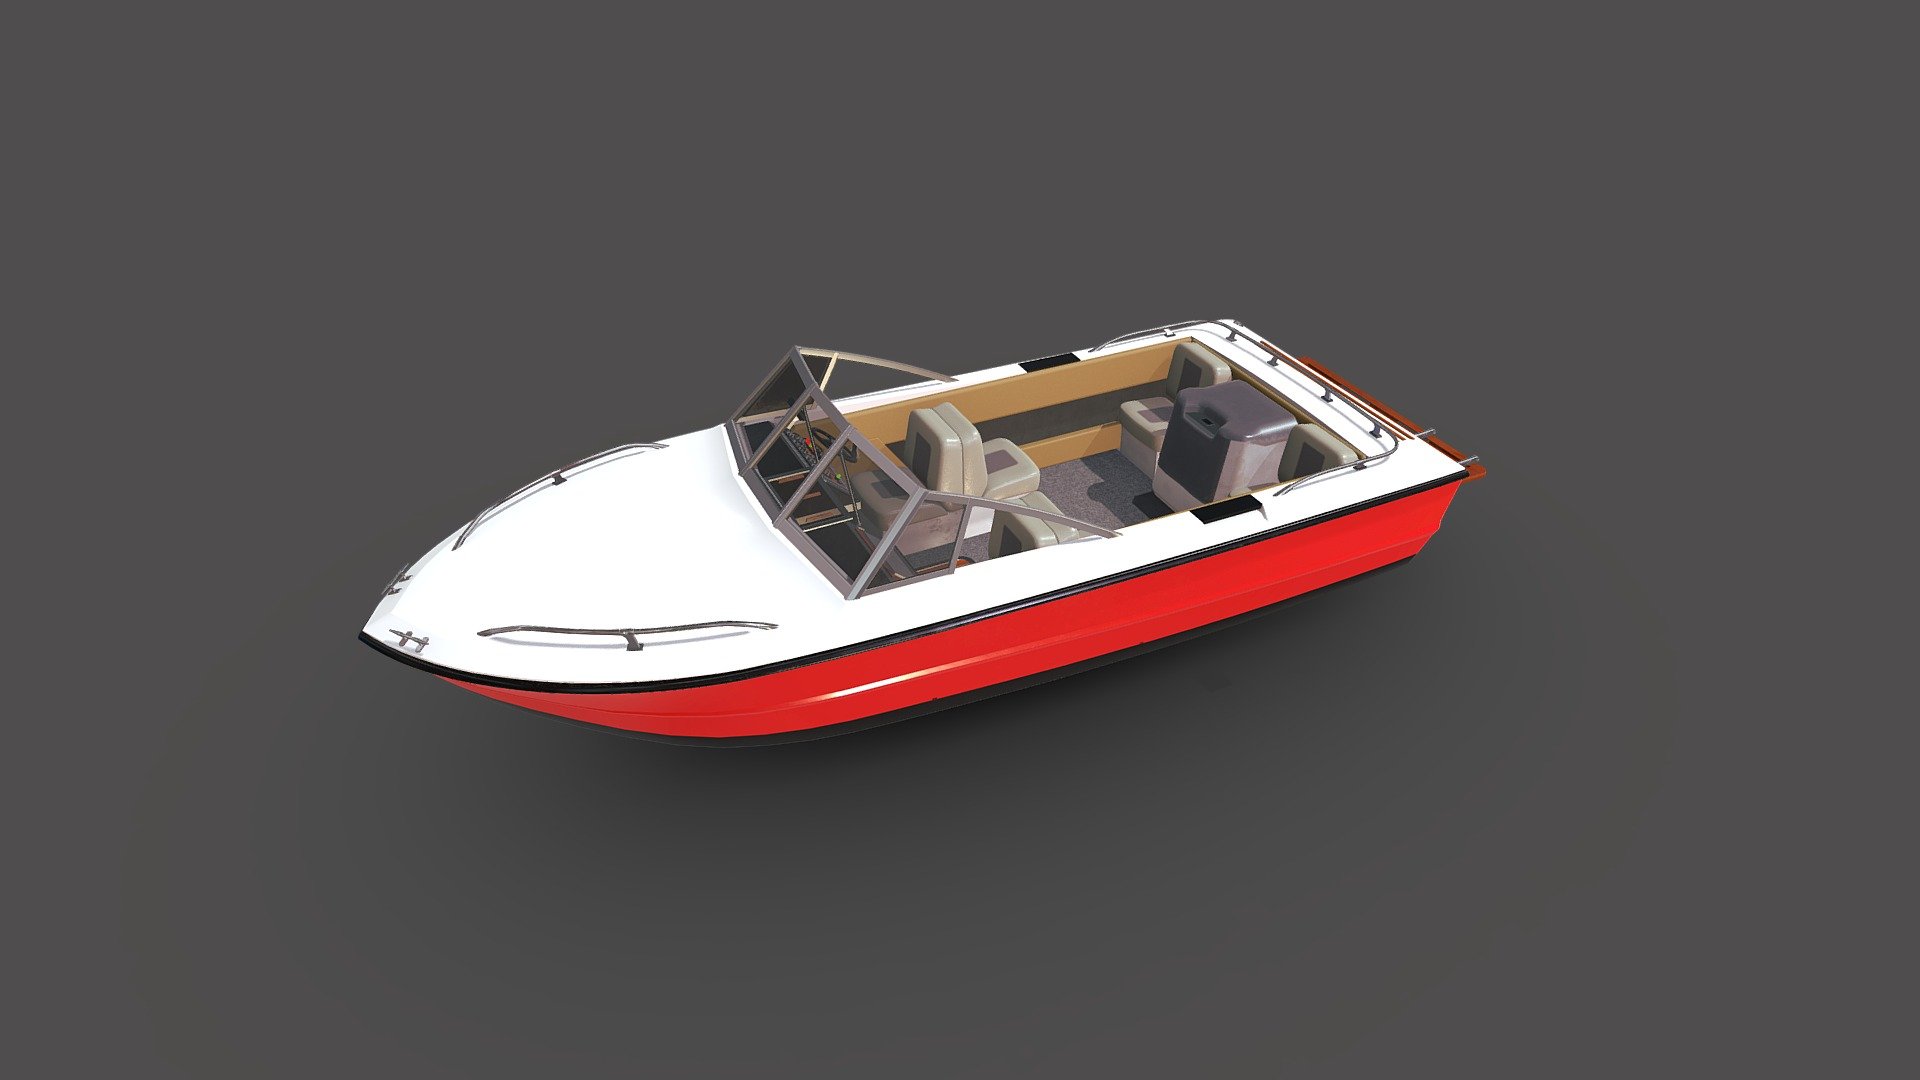 Speedboat


Low-poly ready to use in AR/VR, Games and PBR renders game engines 
Textures are in PNG format 4096x4096 4K PBR Metalness 4 set 
Separate texture files for Unity PBR Specular Smoothness and Metallic Smoothness
 Separate texture files for Unreal Engine
If you need any other file format you can always request it.
All formats include materials and textures.
 - Speedboat Low-poly PBR - Buy Royalty Free 3D model by MaX3Dd 3d model